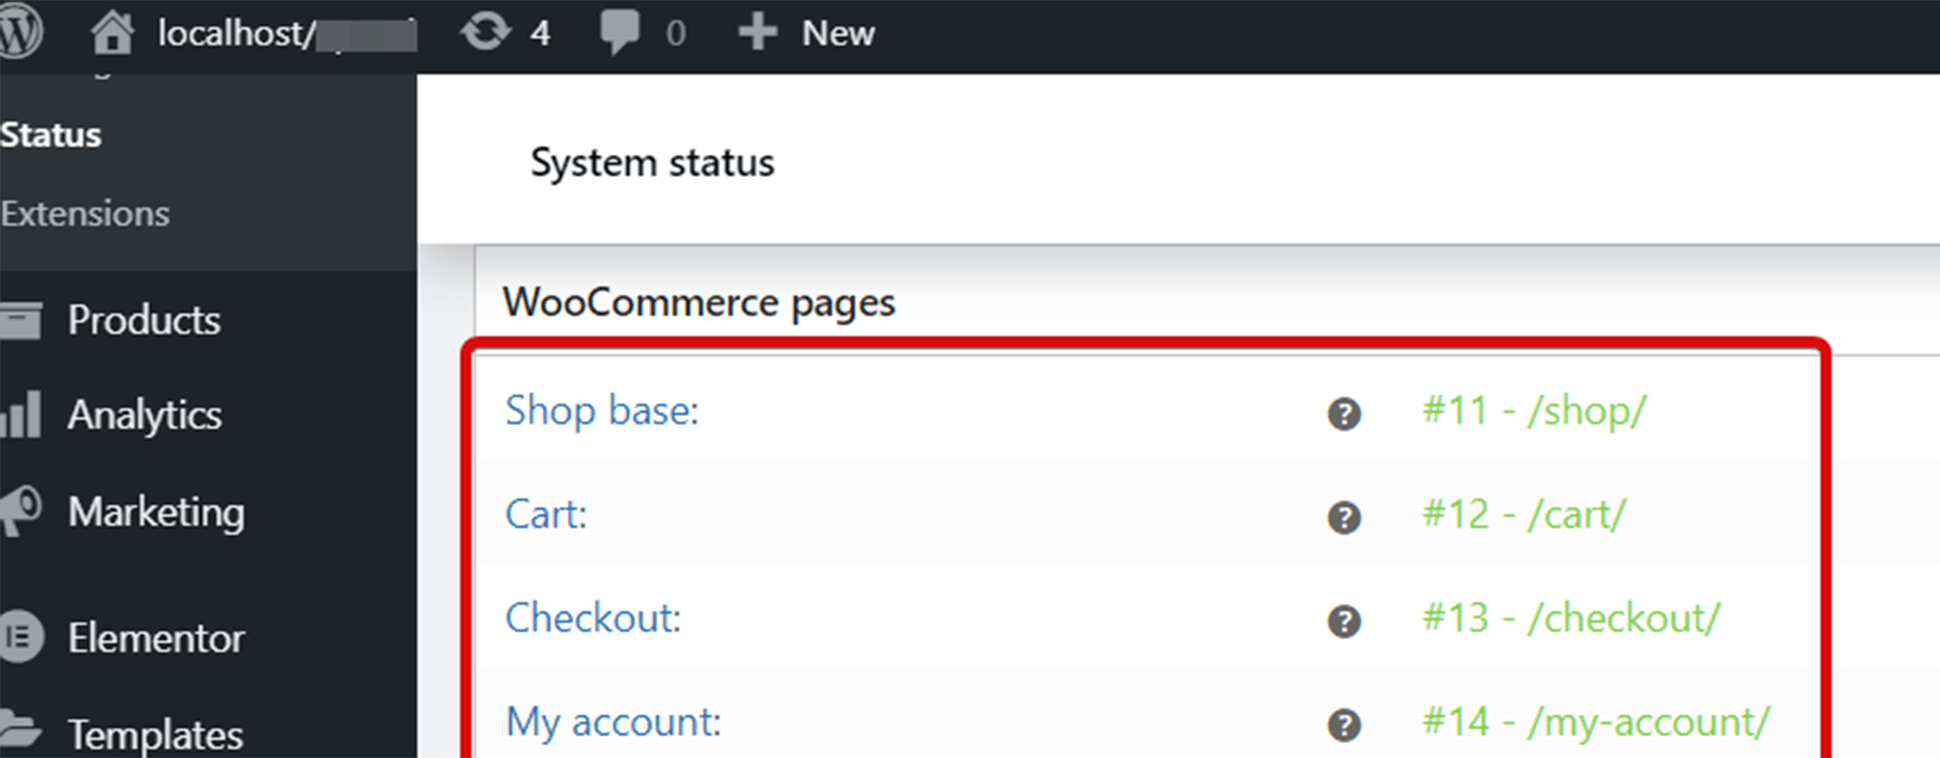 Check WooCommerce Page status